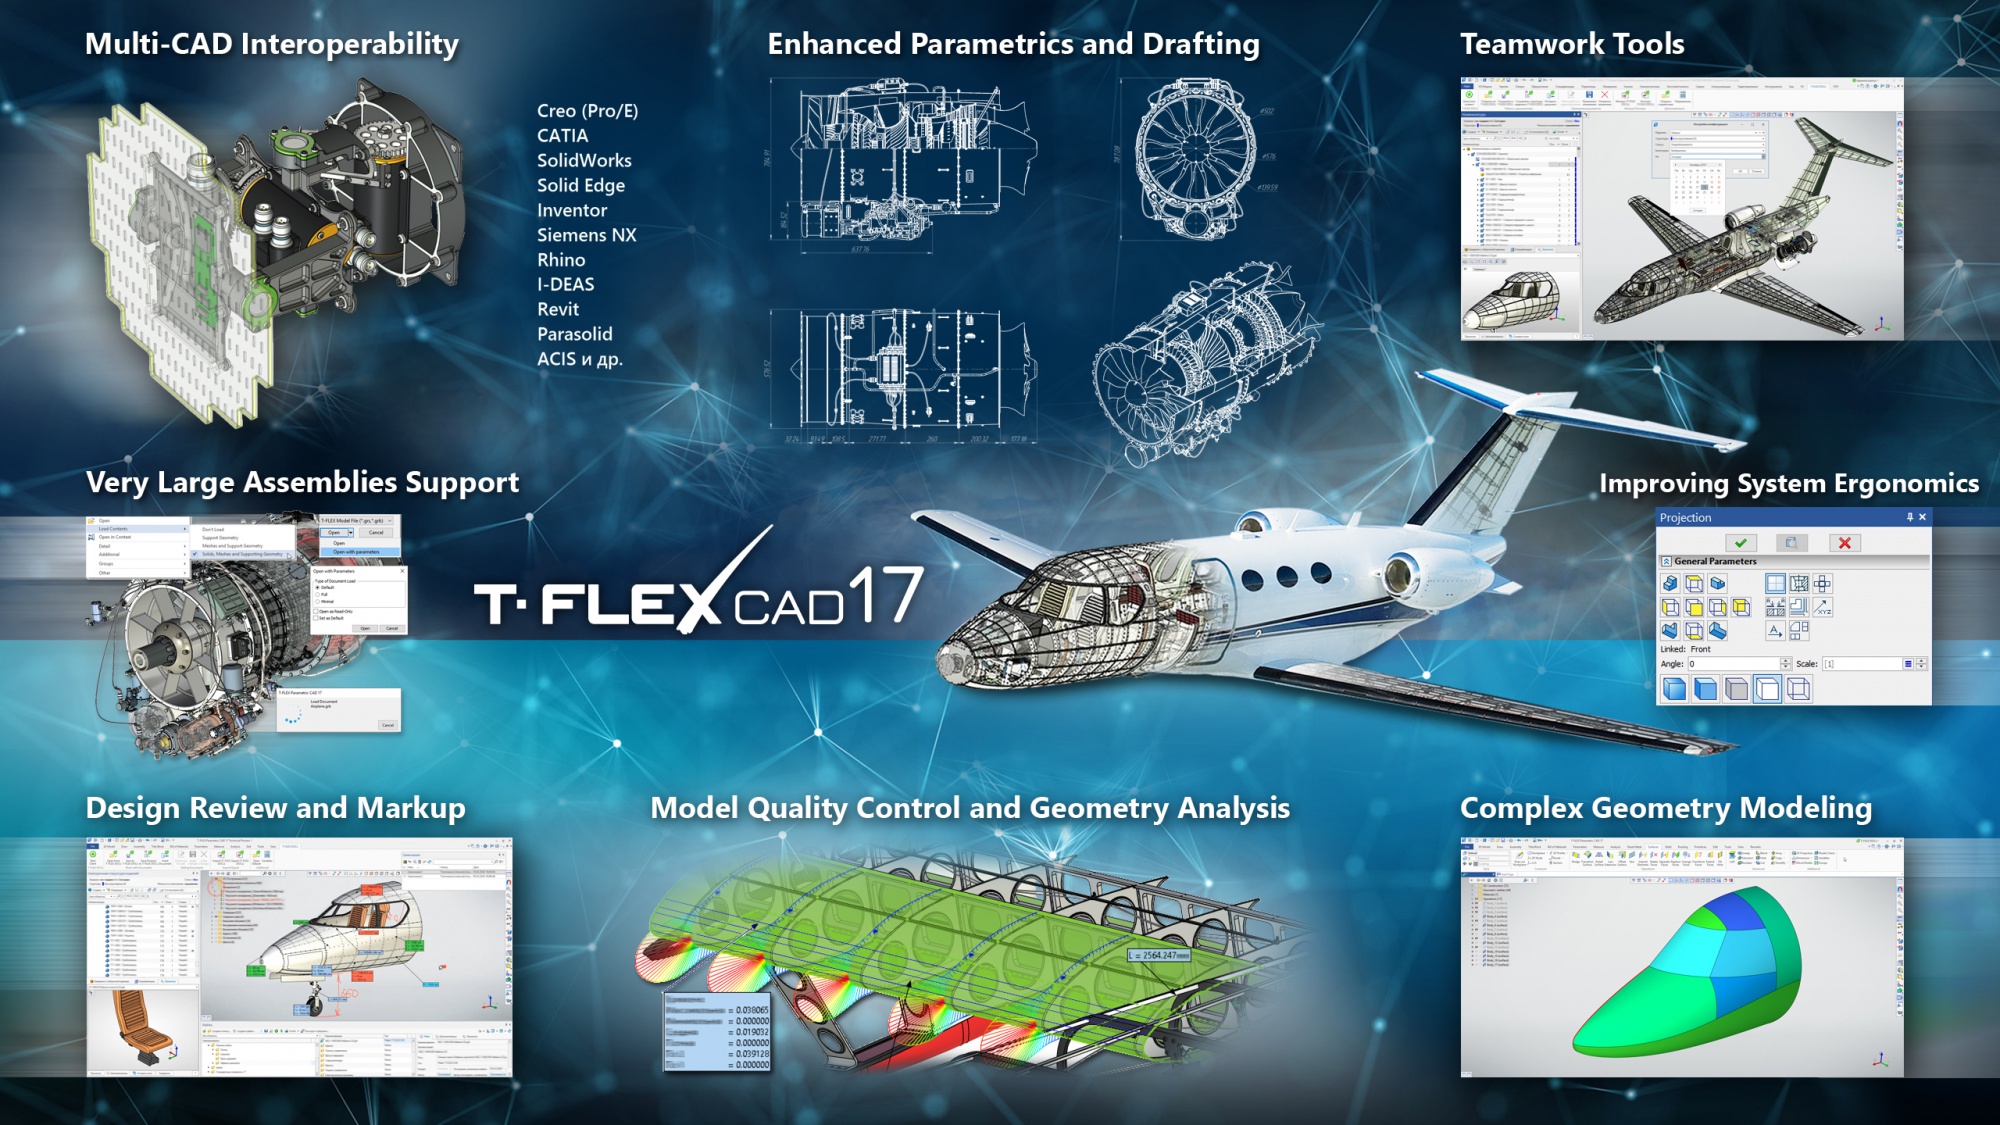 What's new in T-FLEX CAD 17